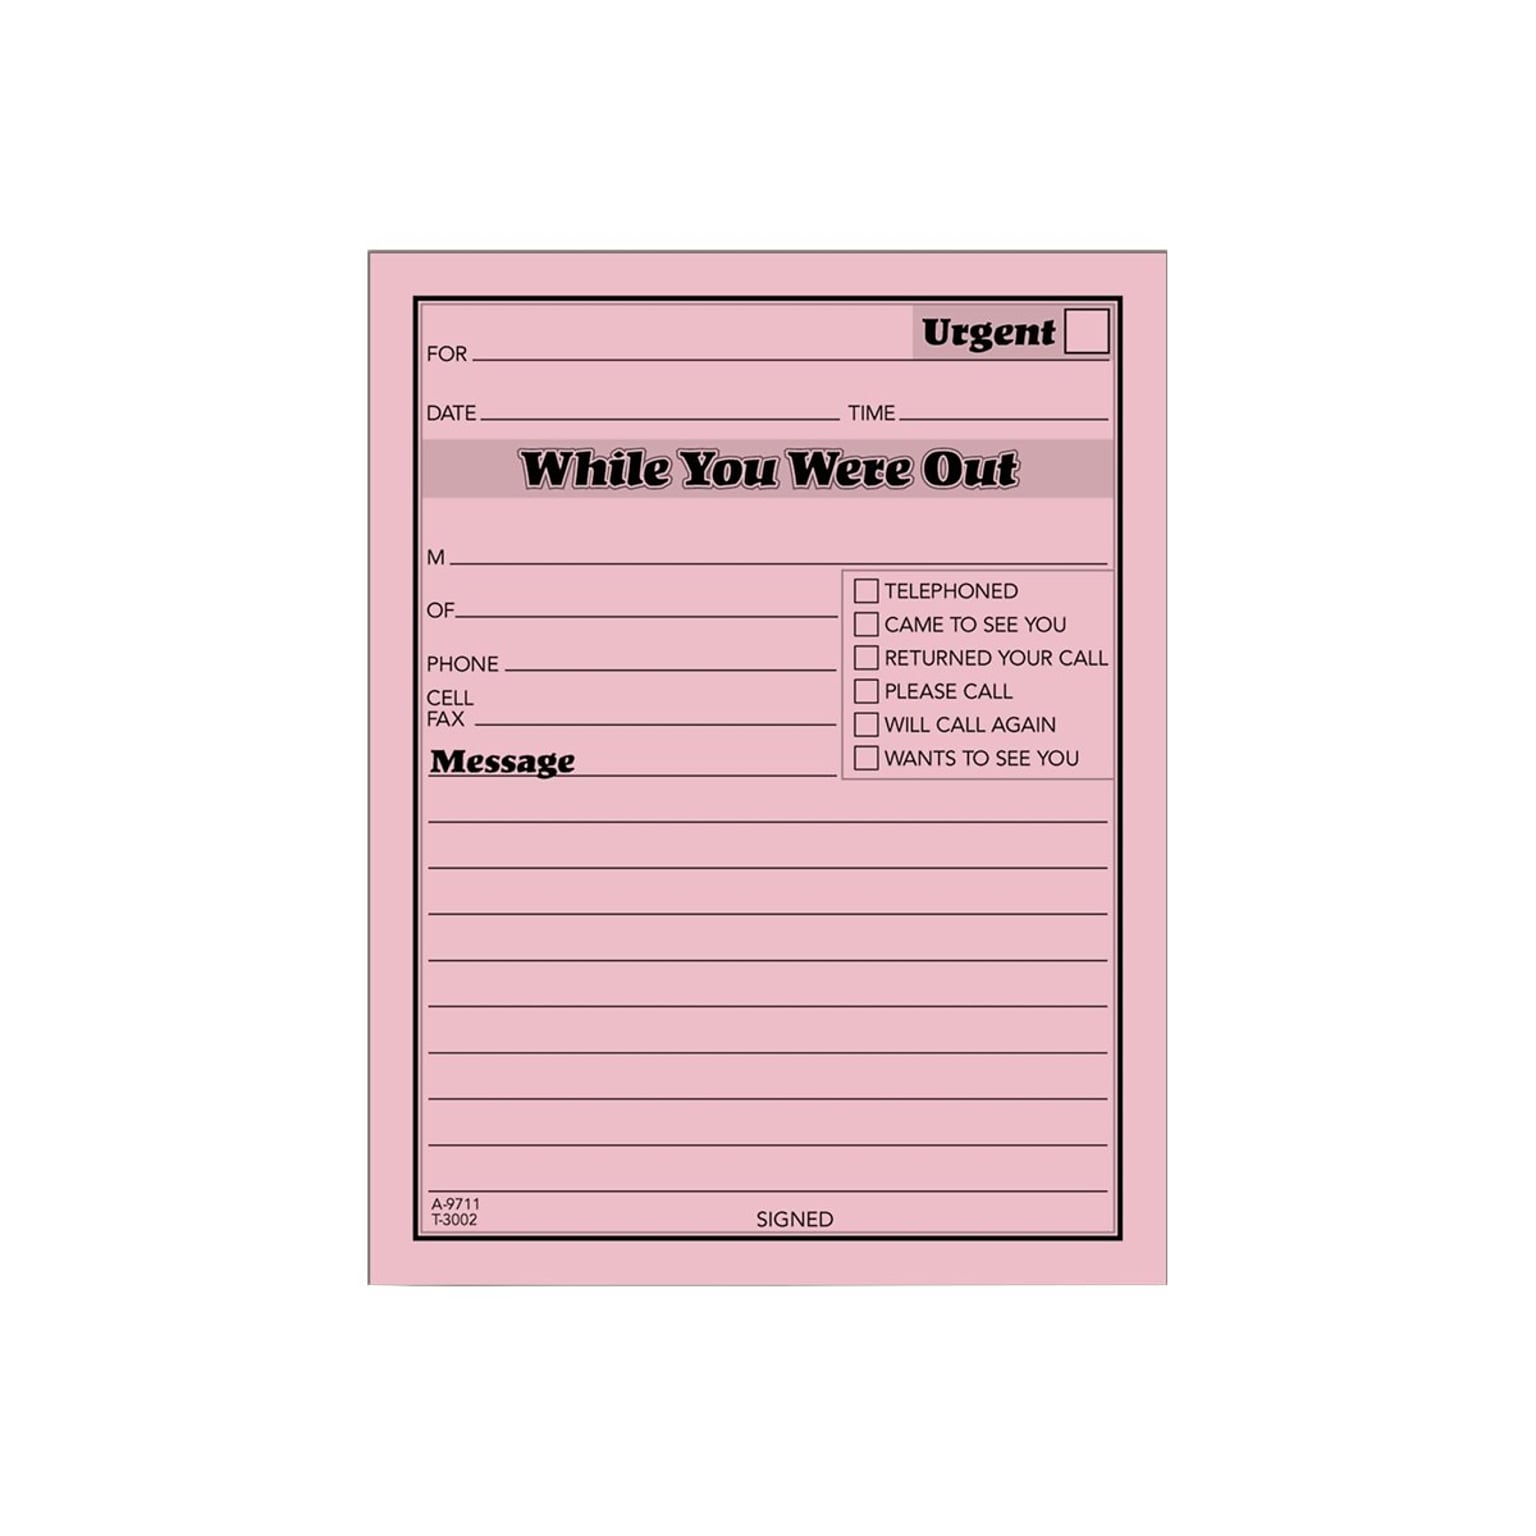 TOPS While You Were Out Message Pads, 4.25 x 5.5, Pink, 50 Sheets/Pad, 12 Pads/Pack (TOP 3002P)